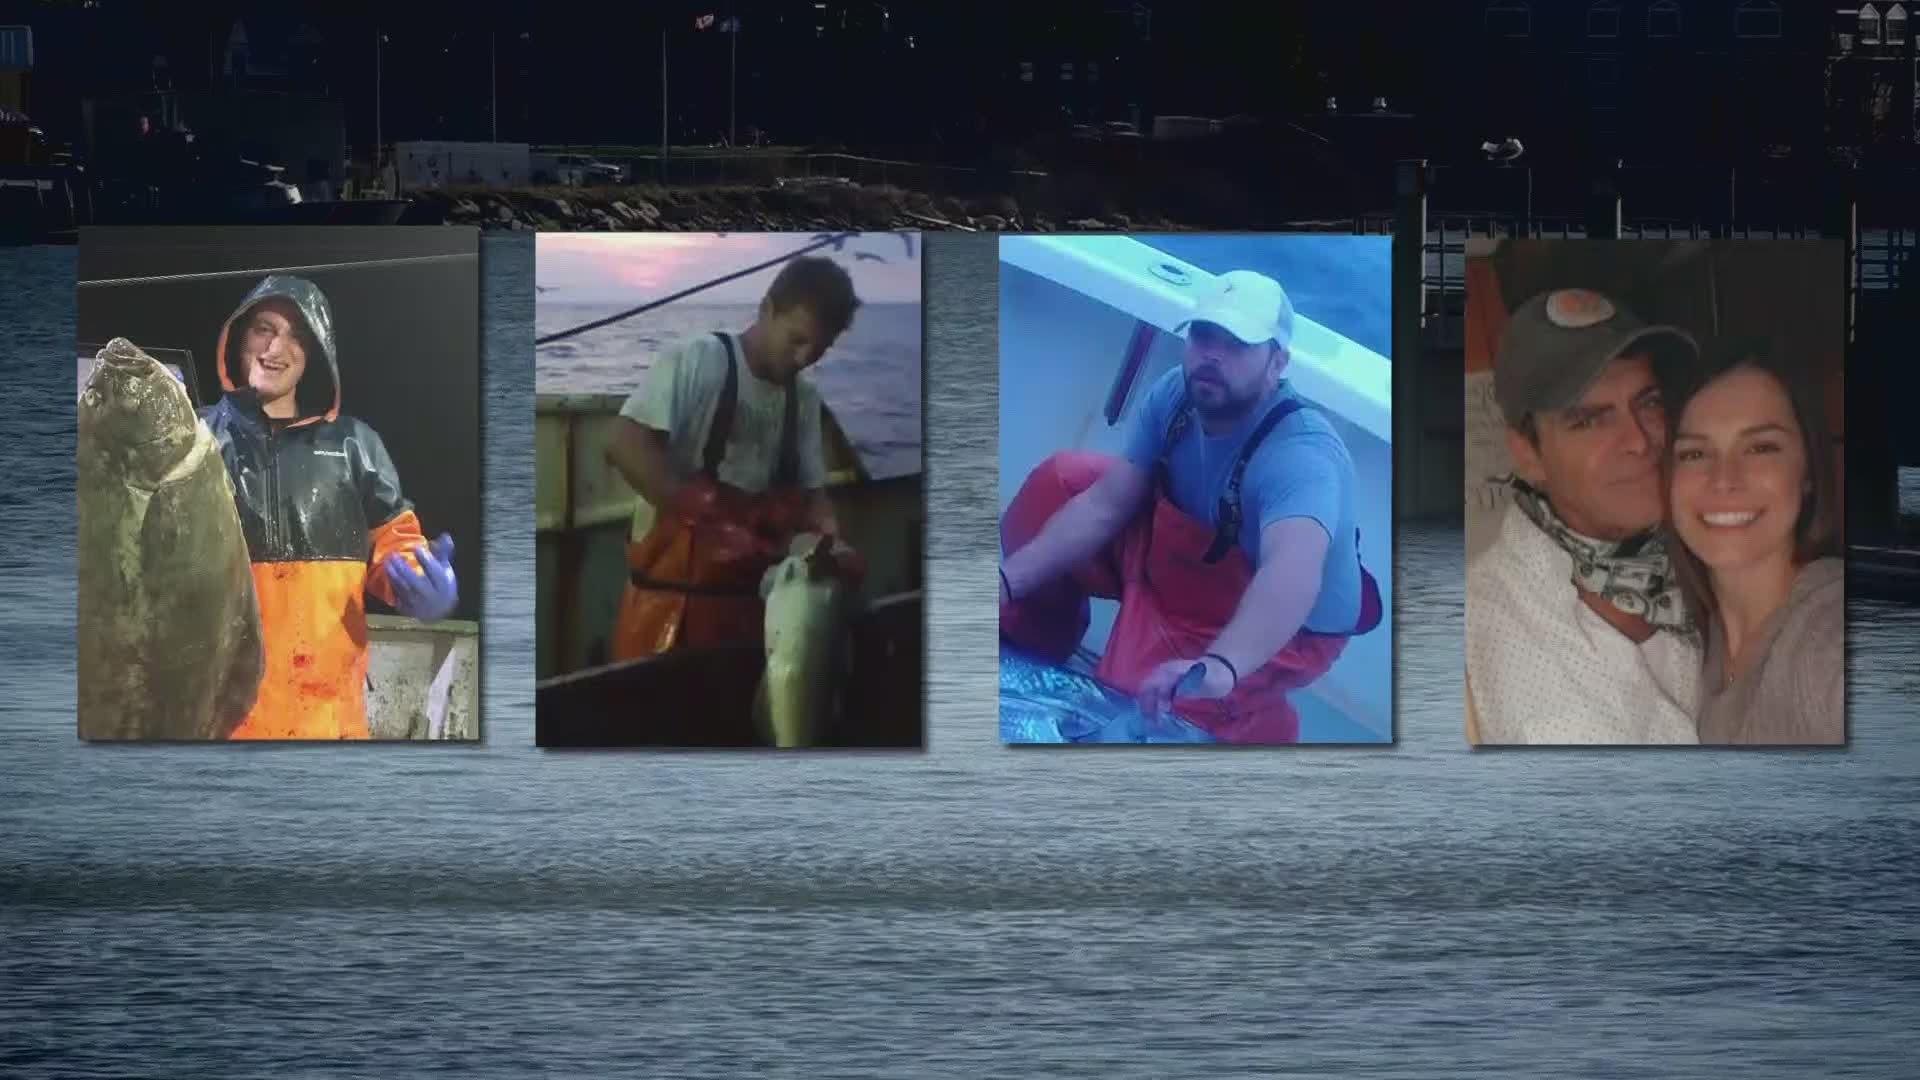 Since the search was called off for the four Maine fishermen whose boat went down off the coast of Massachusetts, $100,000 has been raised for their families.